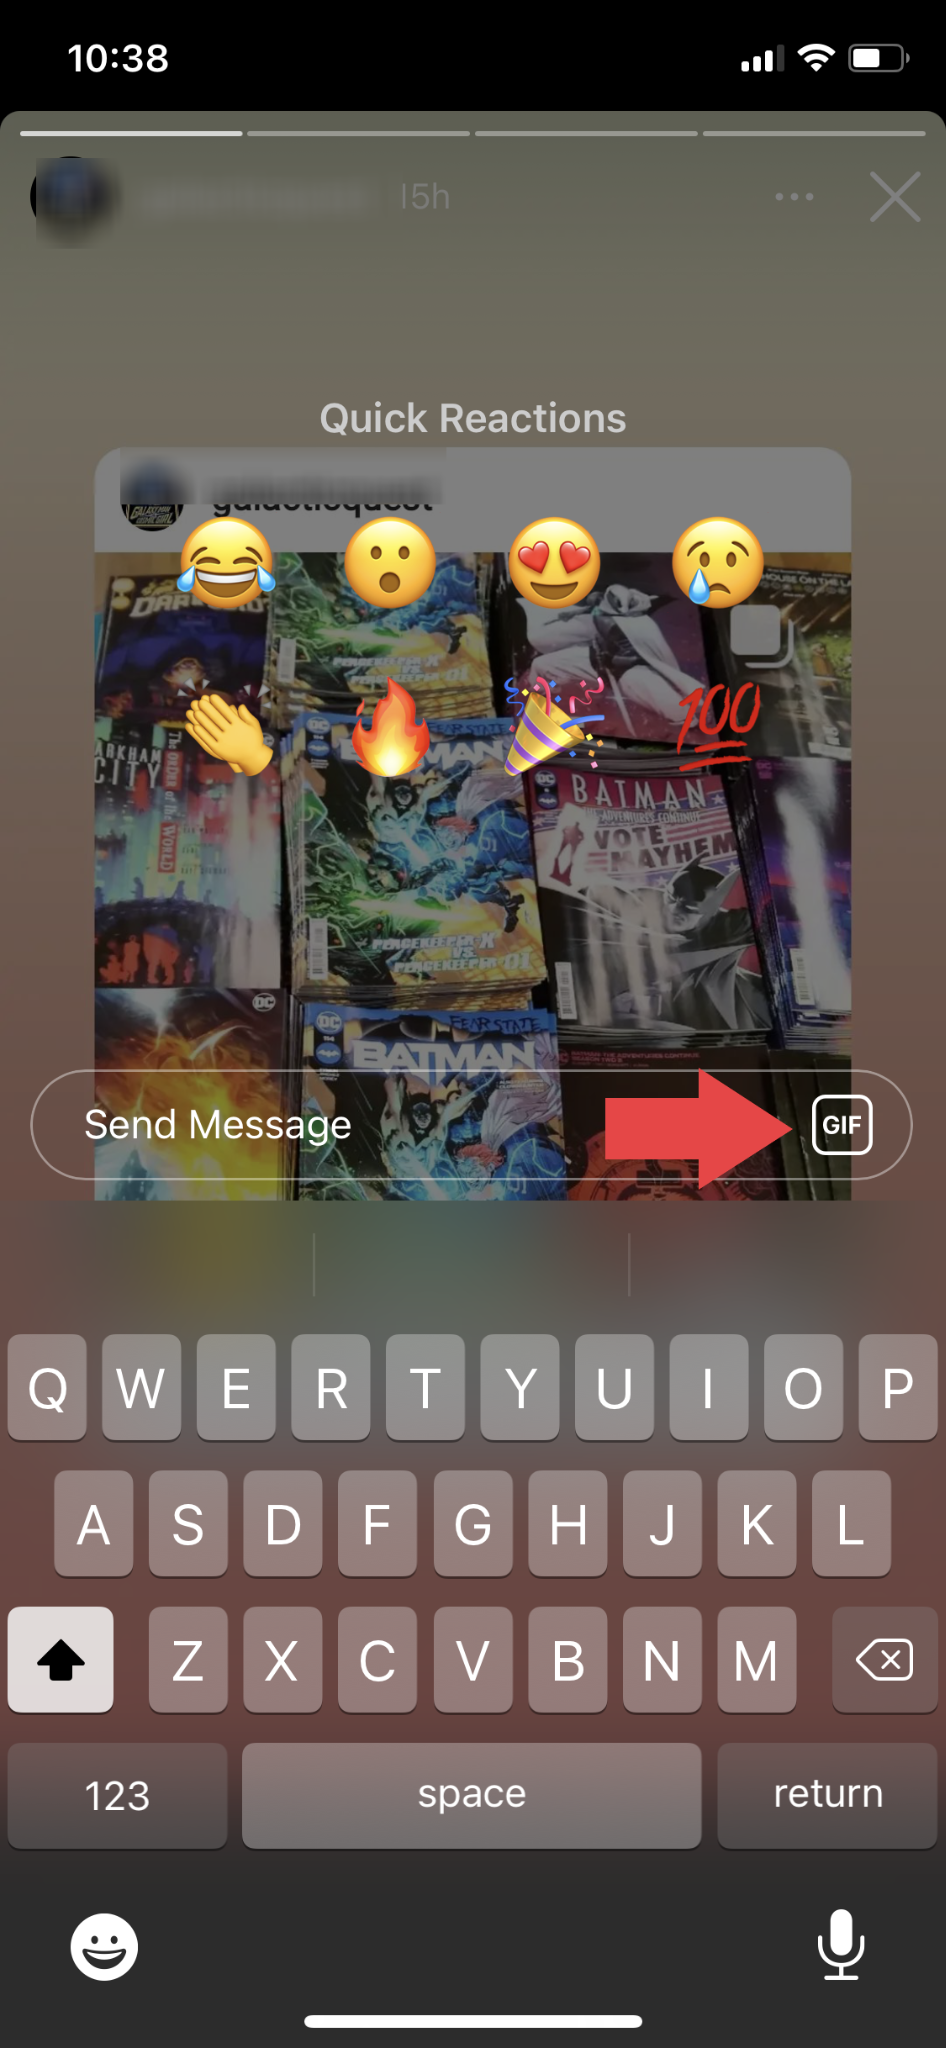 tap-the-gif-icon-to-the-right-of-the-message-box